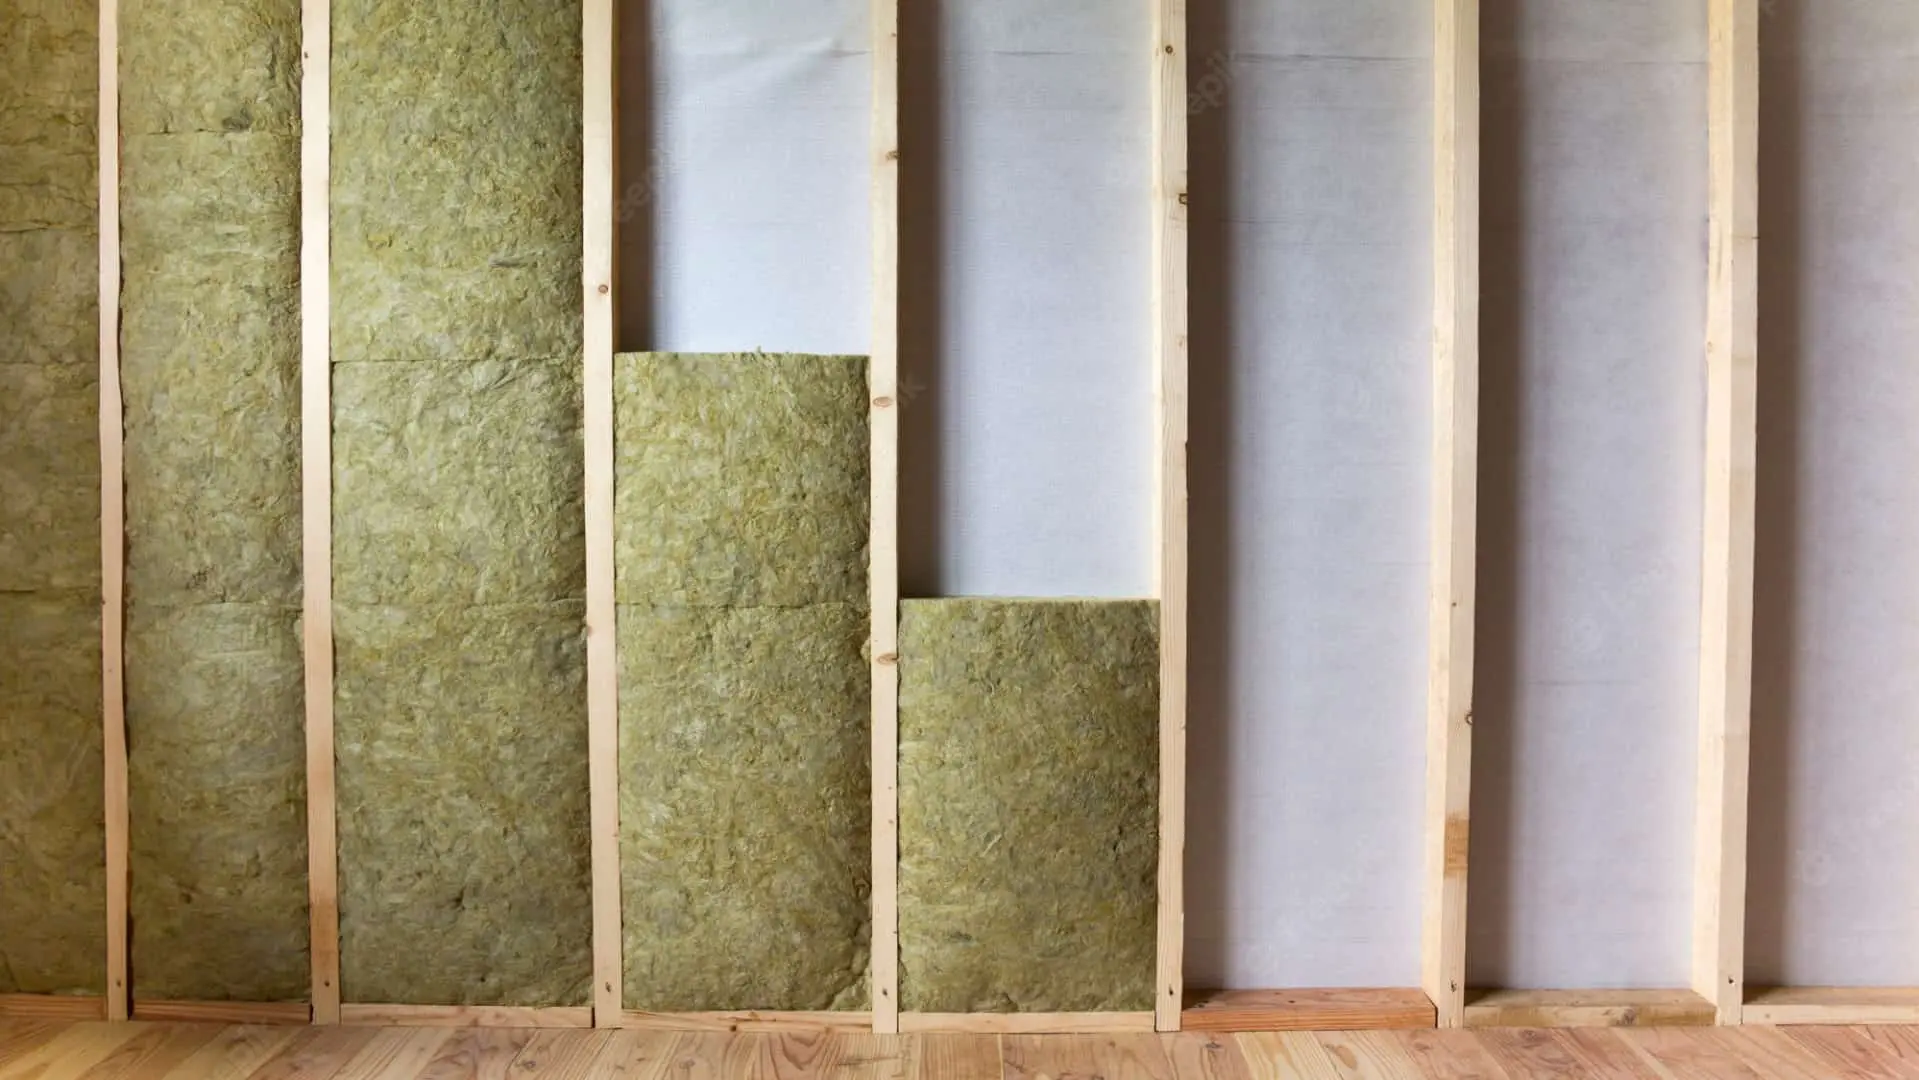 How to make wall insulation, like rockwool? - Materials and